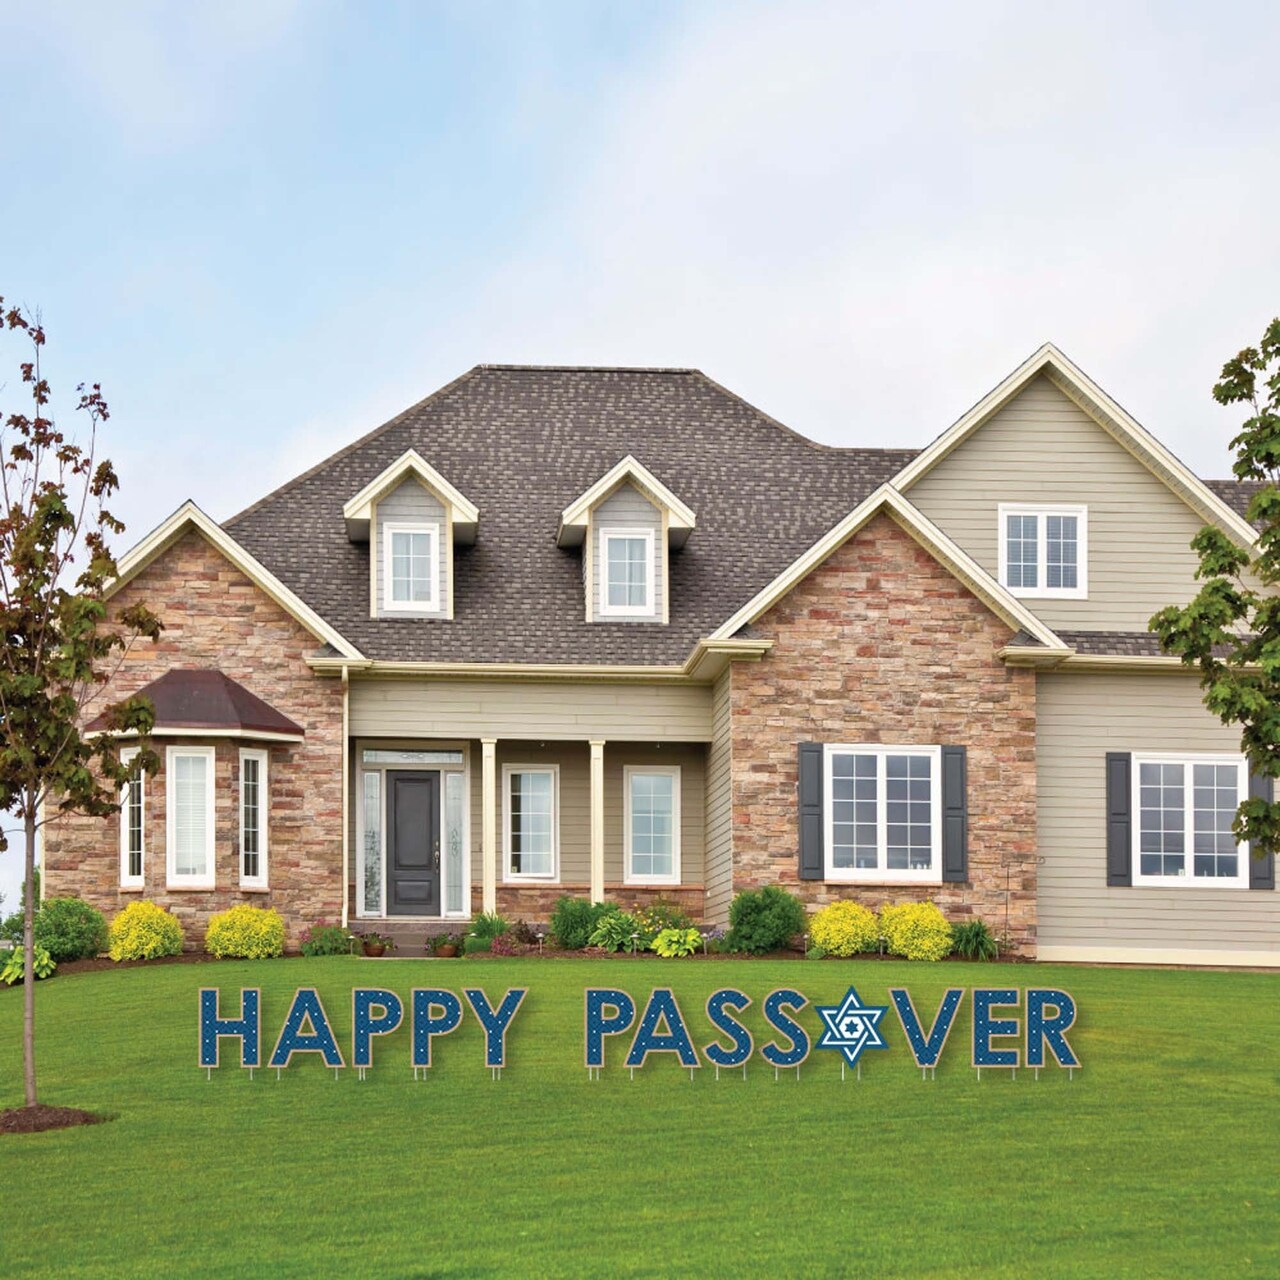 Big Dot of Happiness Happy Passover - Yard Sign Outdoor Lawn Decorations - Pesach Party Yard Signs - Happy Passover